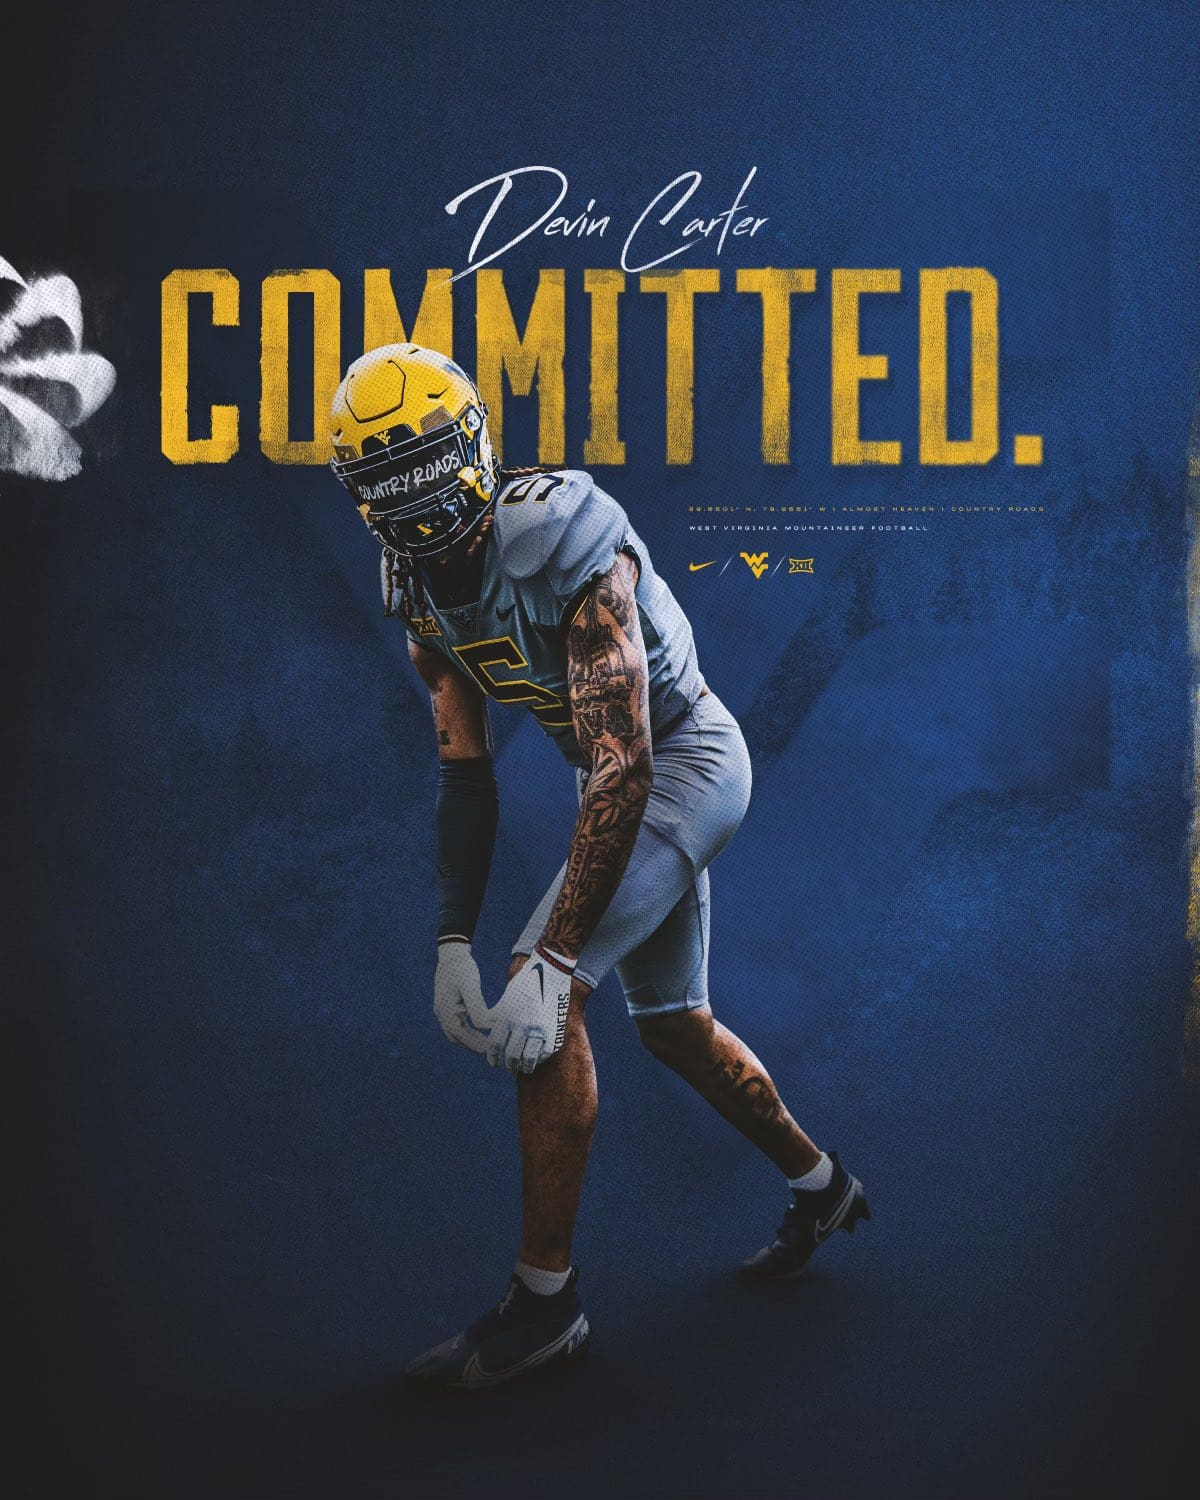 Devin Carter flipped from Penn State to West Virginia.